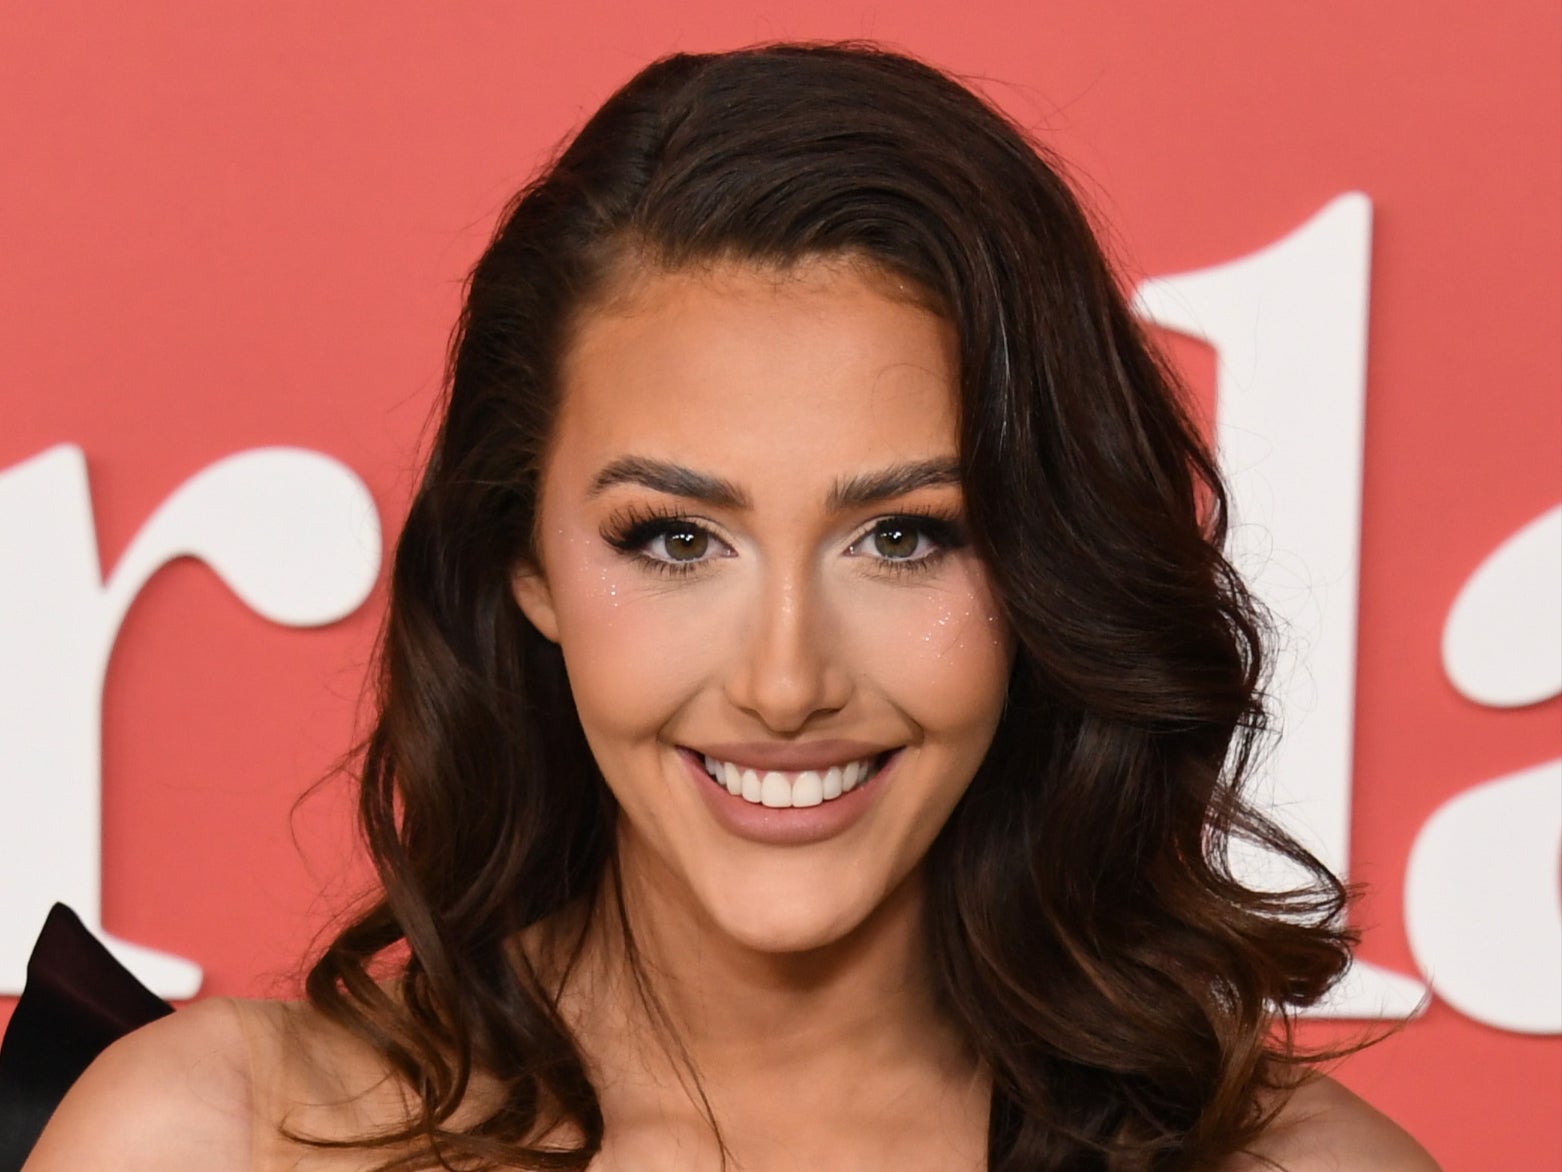 Perfect Match Chloe Veitch age, Instagram, TikTok, height, and more